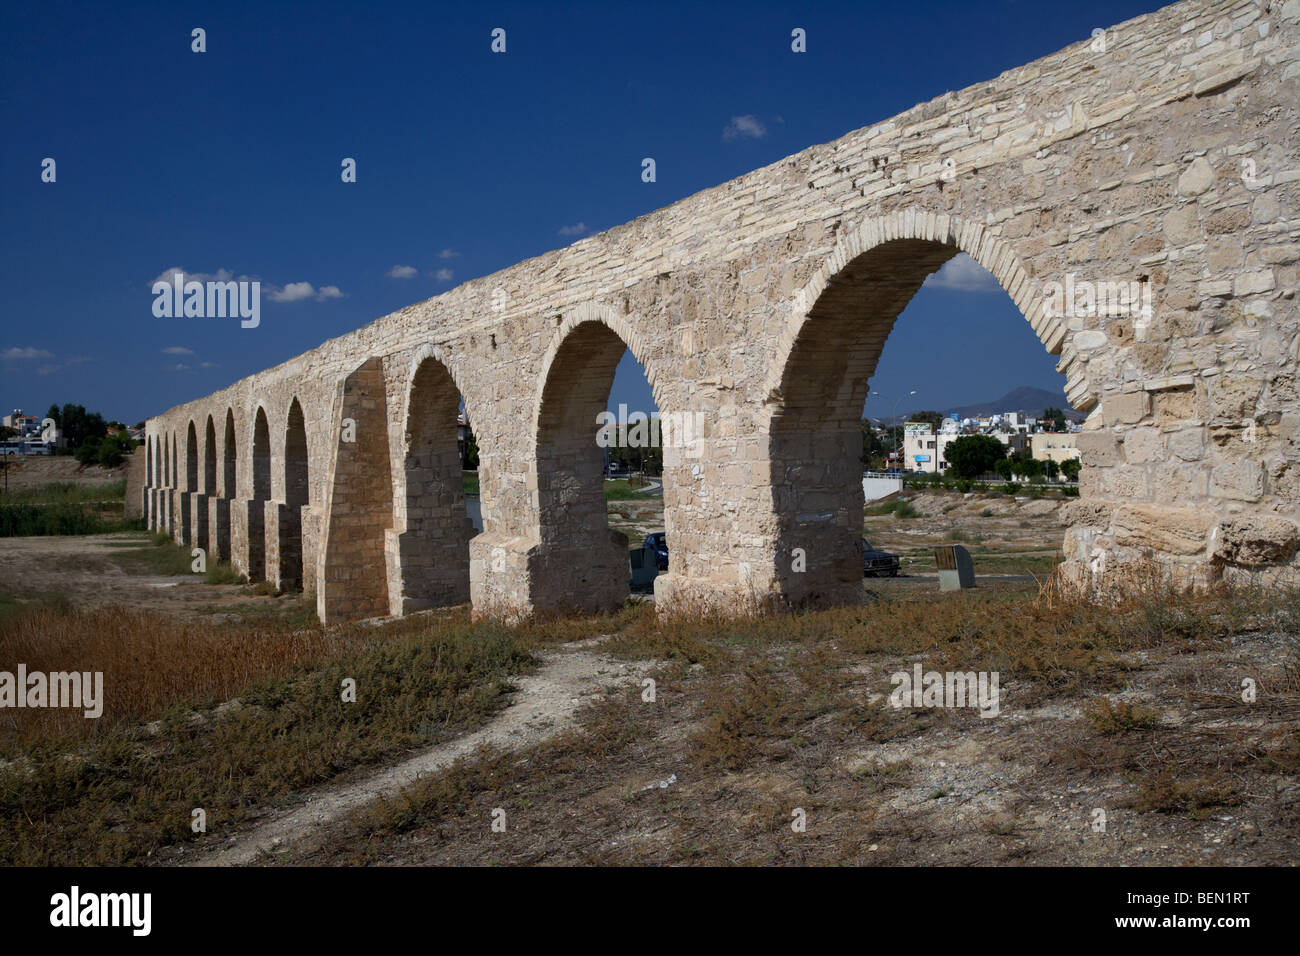 kamares aqueduct larnaca republic of cyprus europe the aqueduct was built in 1750 by Bekir Pasha the Ottoman governor of Cyprus Stock Photo